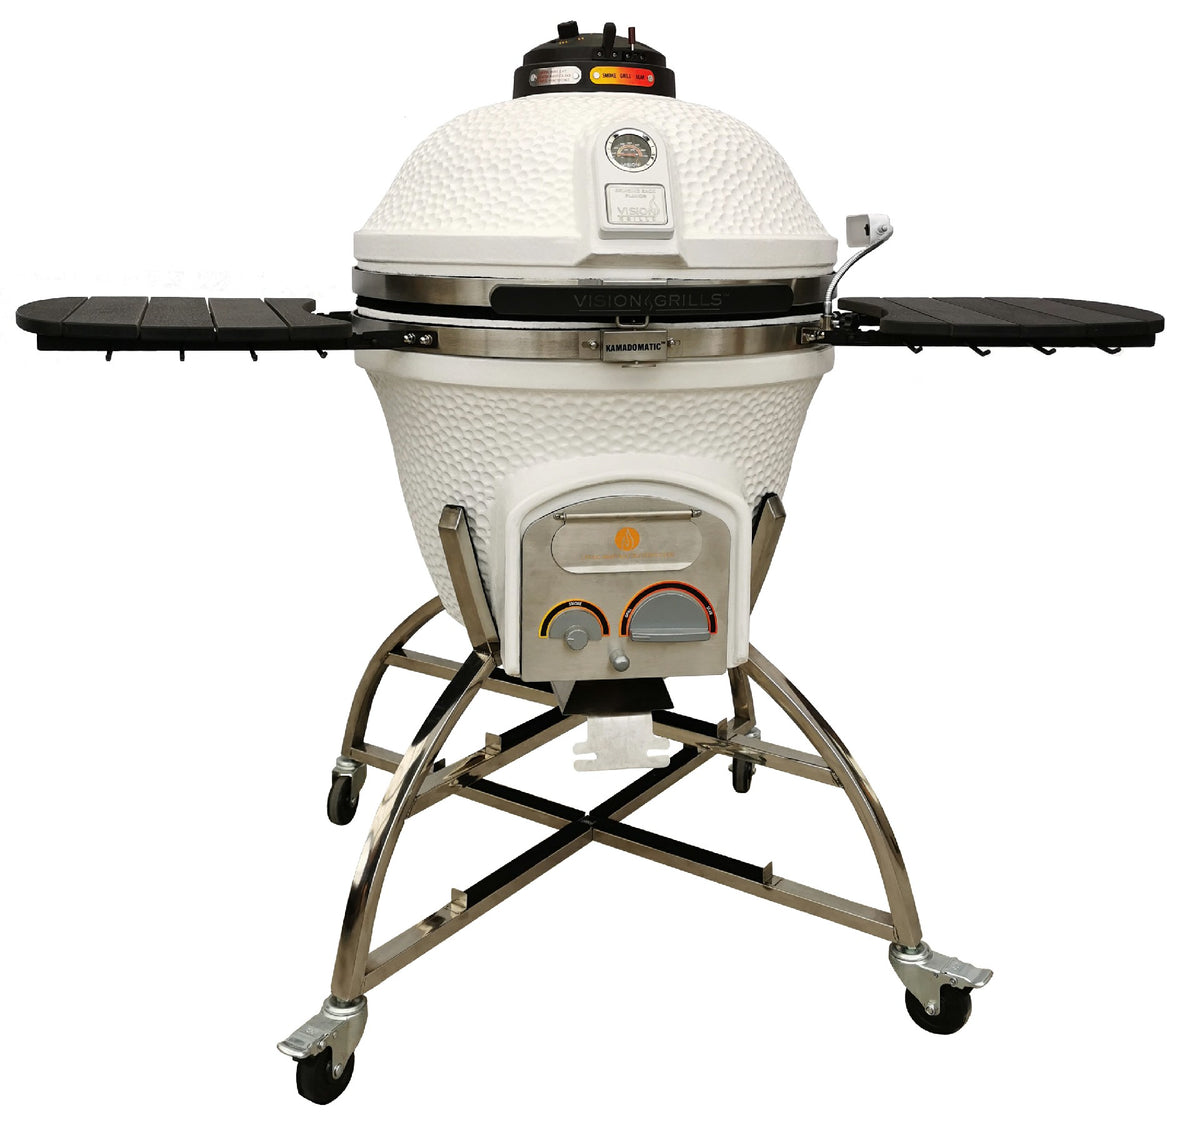 Vision Elite Series XR402 Deluxe 20-Inch Kamado Grill - Cottage